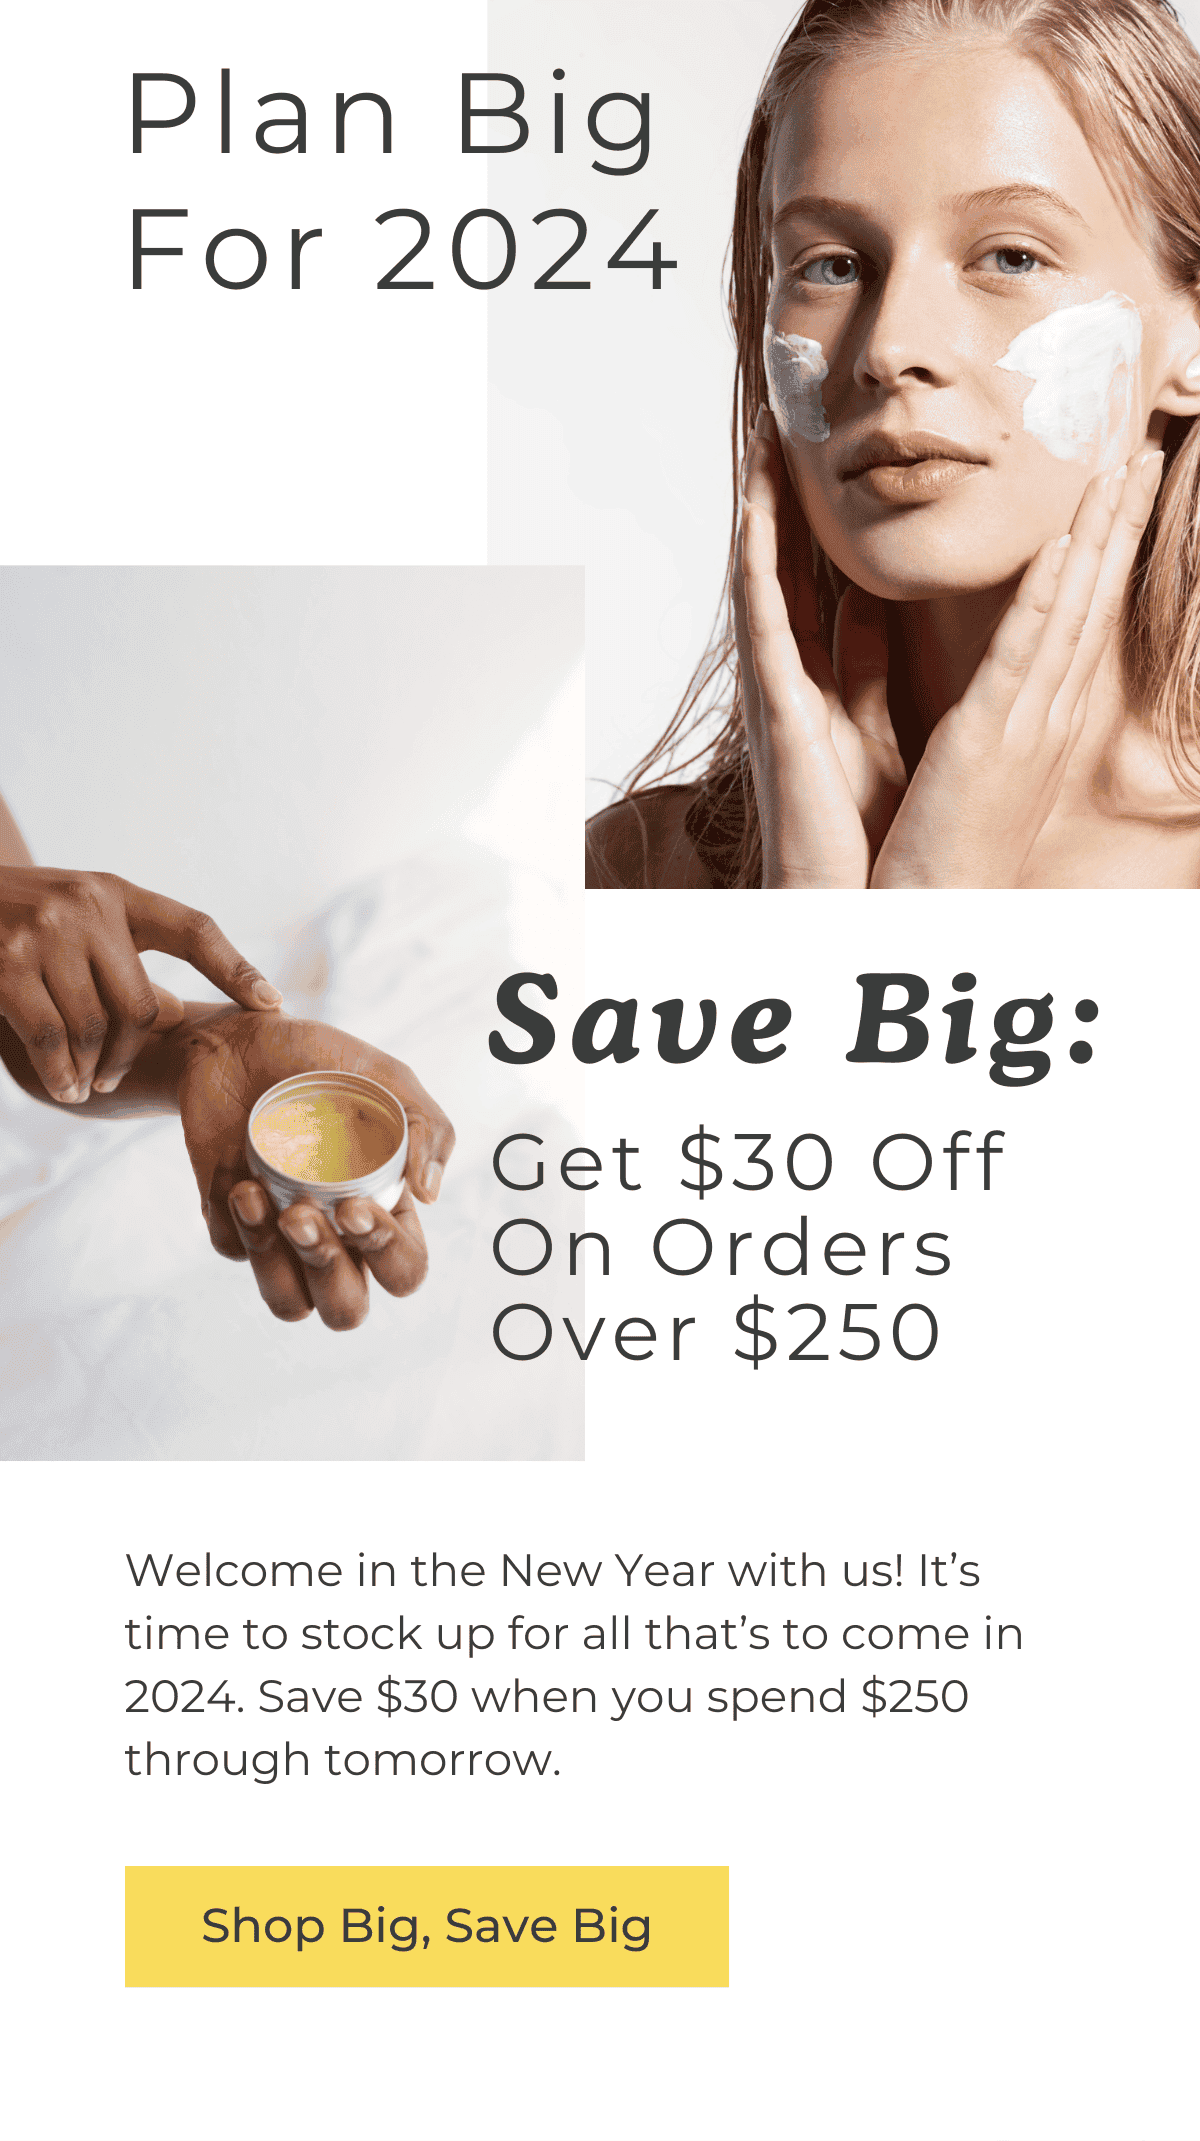 Plan Big For 2024. Save Big: Get \\$30 Off On Orders Over \\$250. Welcome in the New Year with us! It's time to stock up for all that's to come in 2024. Save \\$30 when you spend \\$250 through tomorrow. SHOP BIG, SAVE BIG